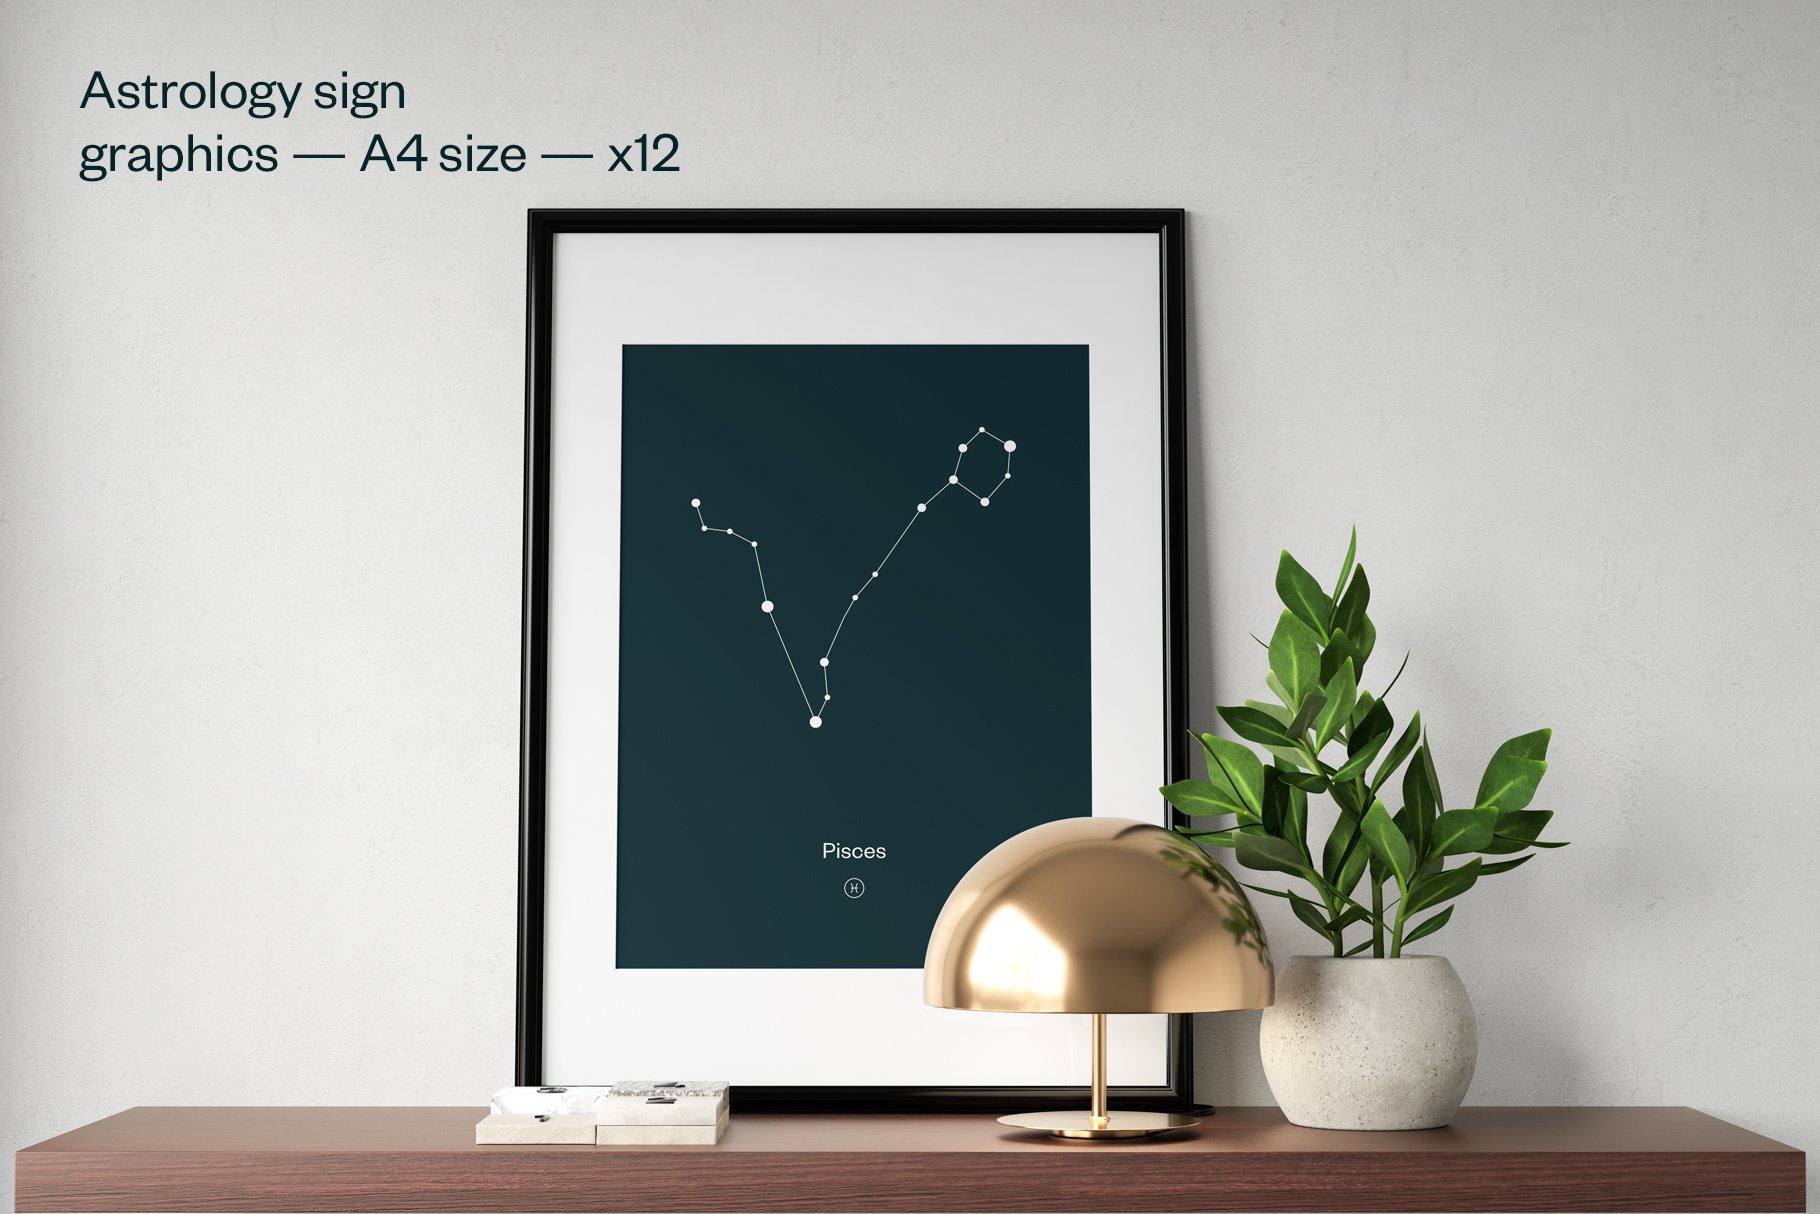 Cool home poster with the astrology sign.